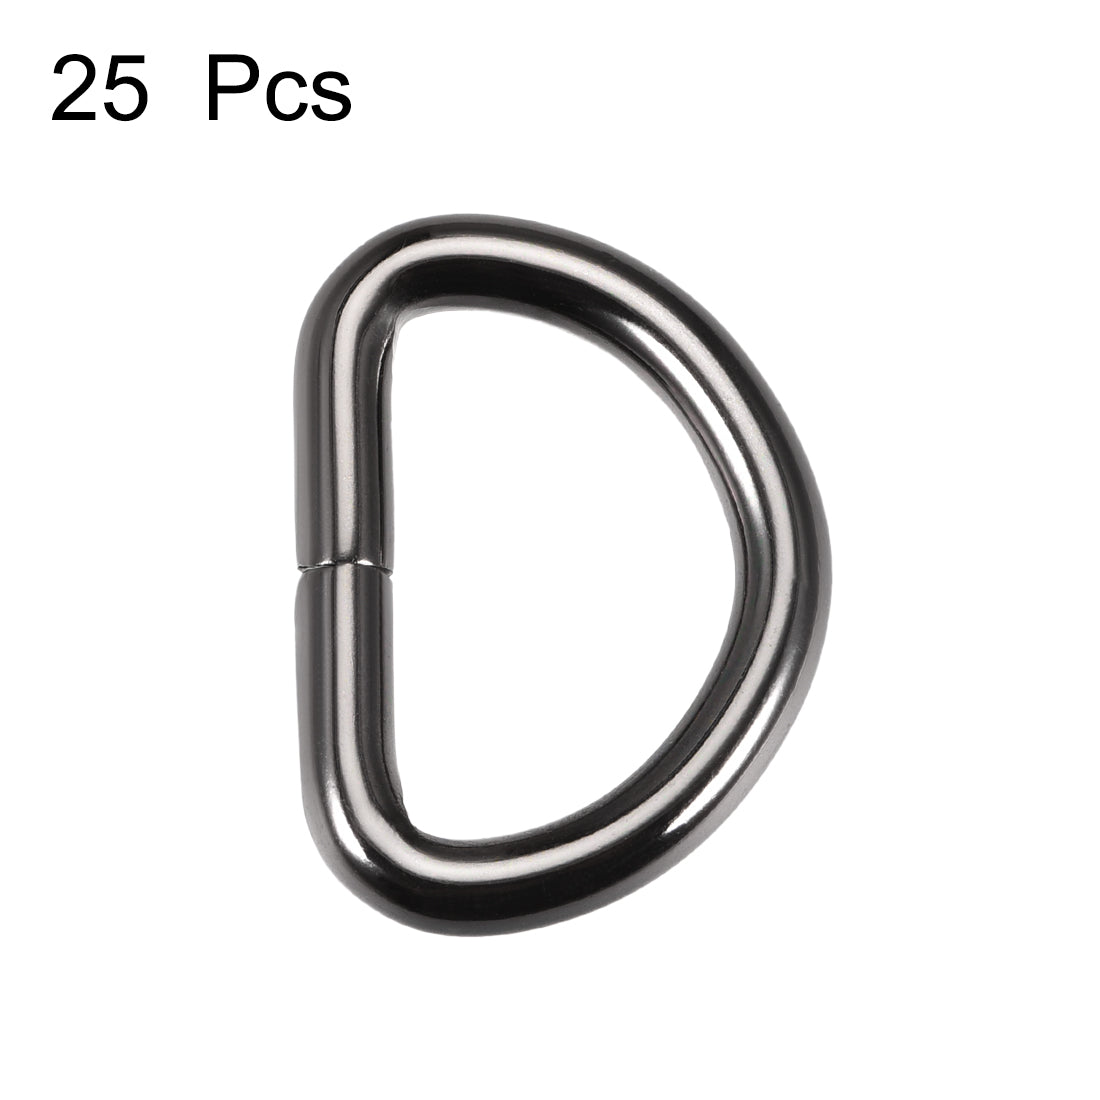 uxcell Uxcell 25 Pcs D Ring Buckle 1 Inch Metal Semi-Circular D-Rings Black for Hardware Bags Belts Craft DIY Accessories